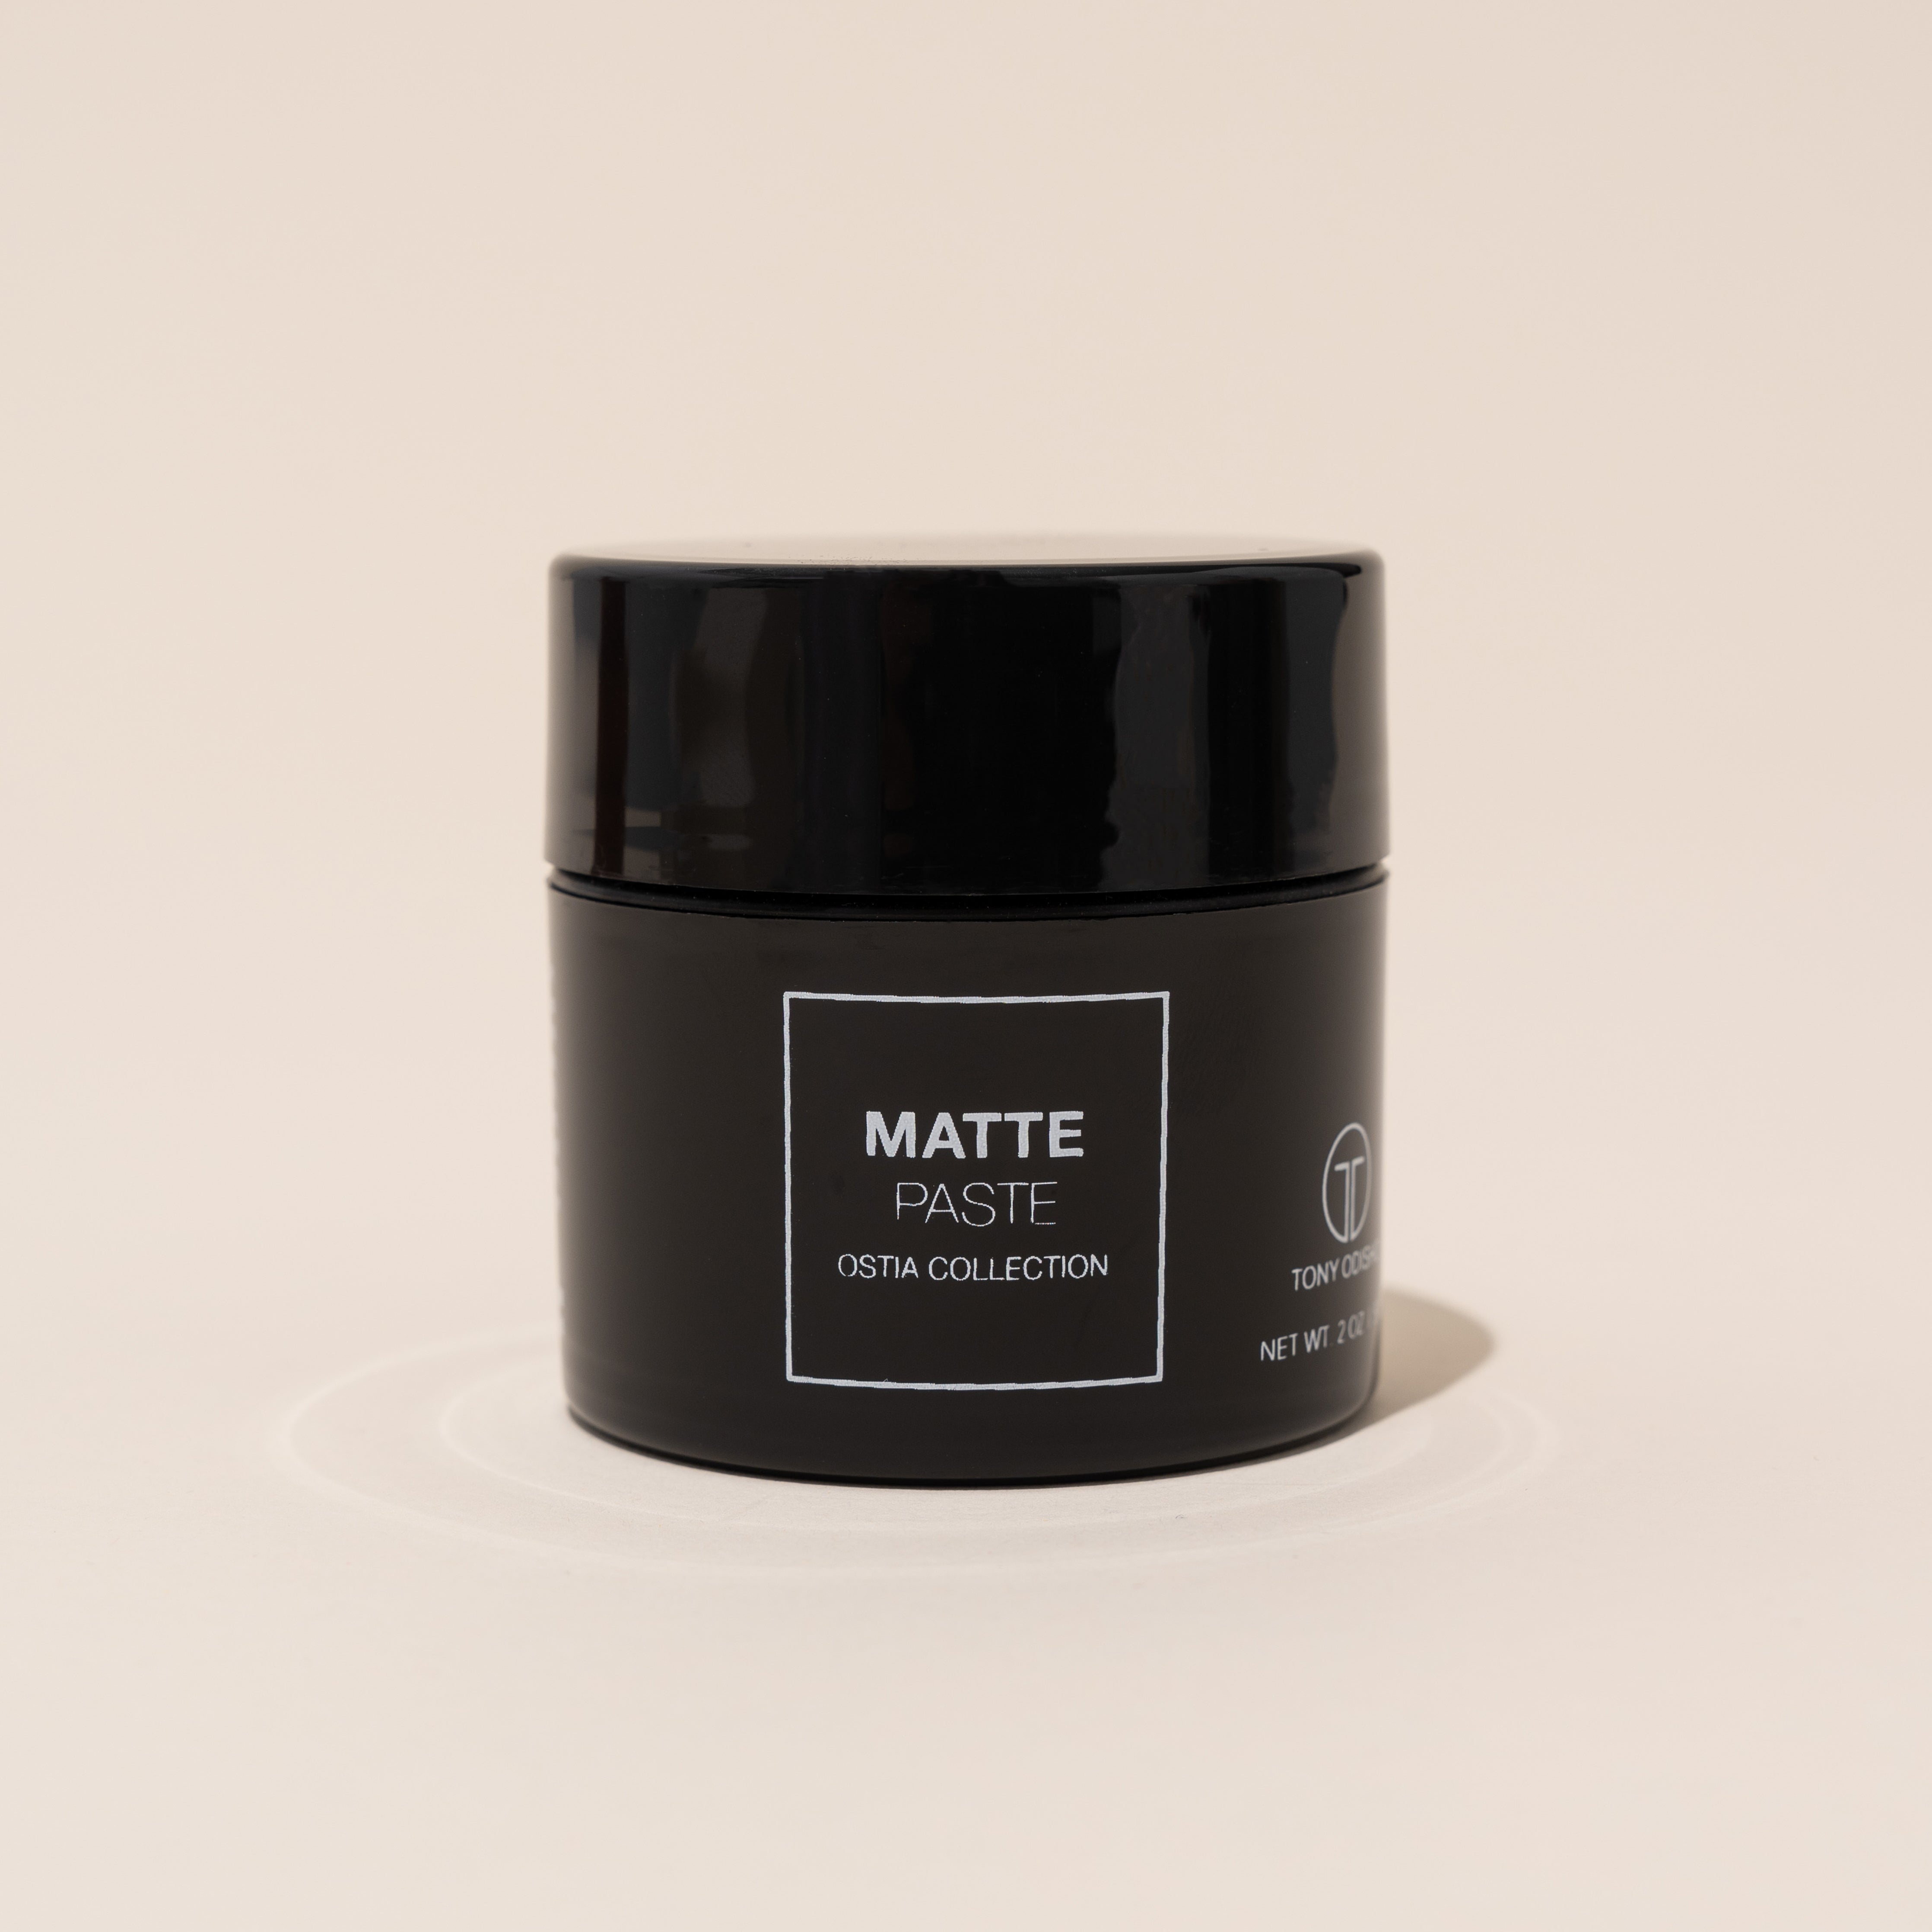 Ostia Collection Matte Paste 2oz | Gives the hair a natural matte finish